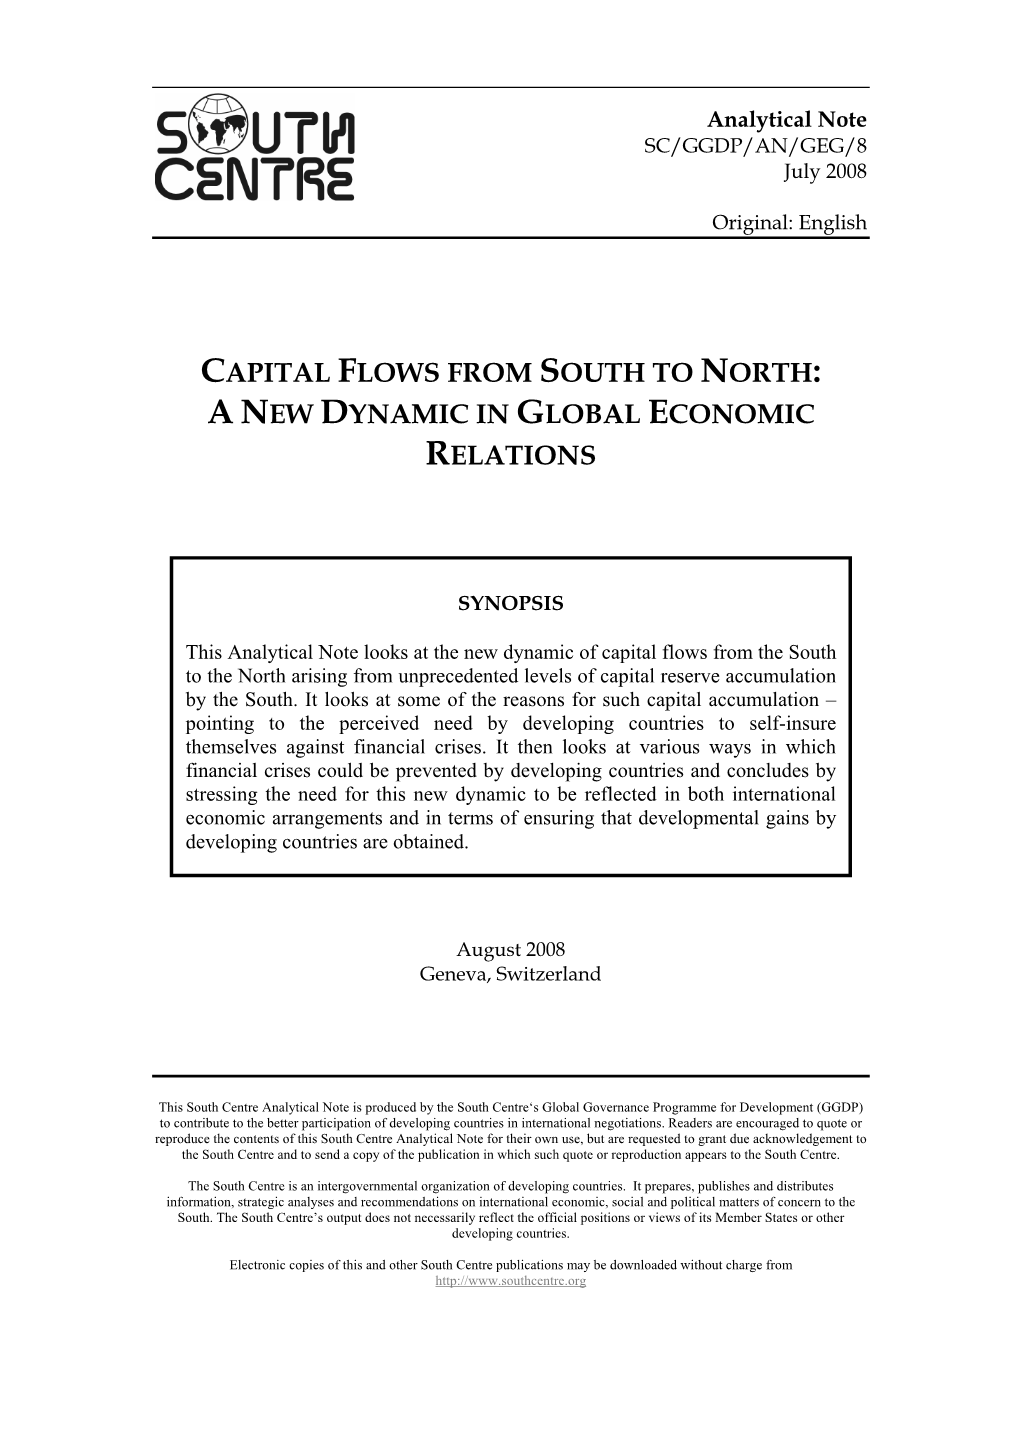 A New Dynamic in Global Economic Relations